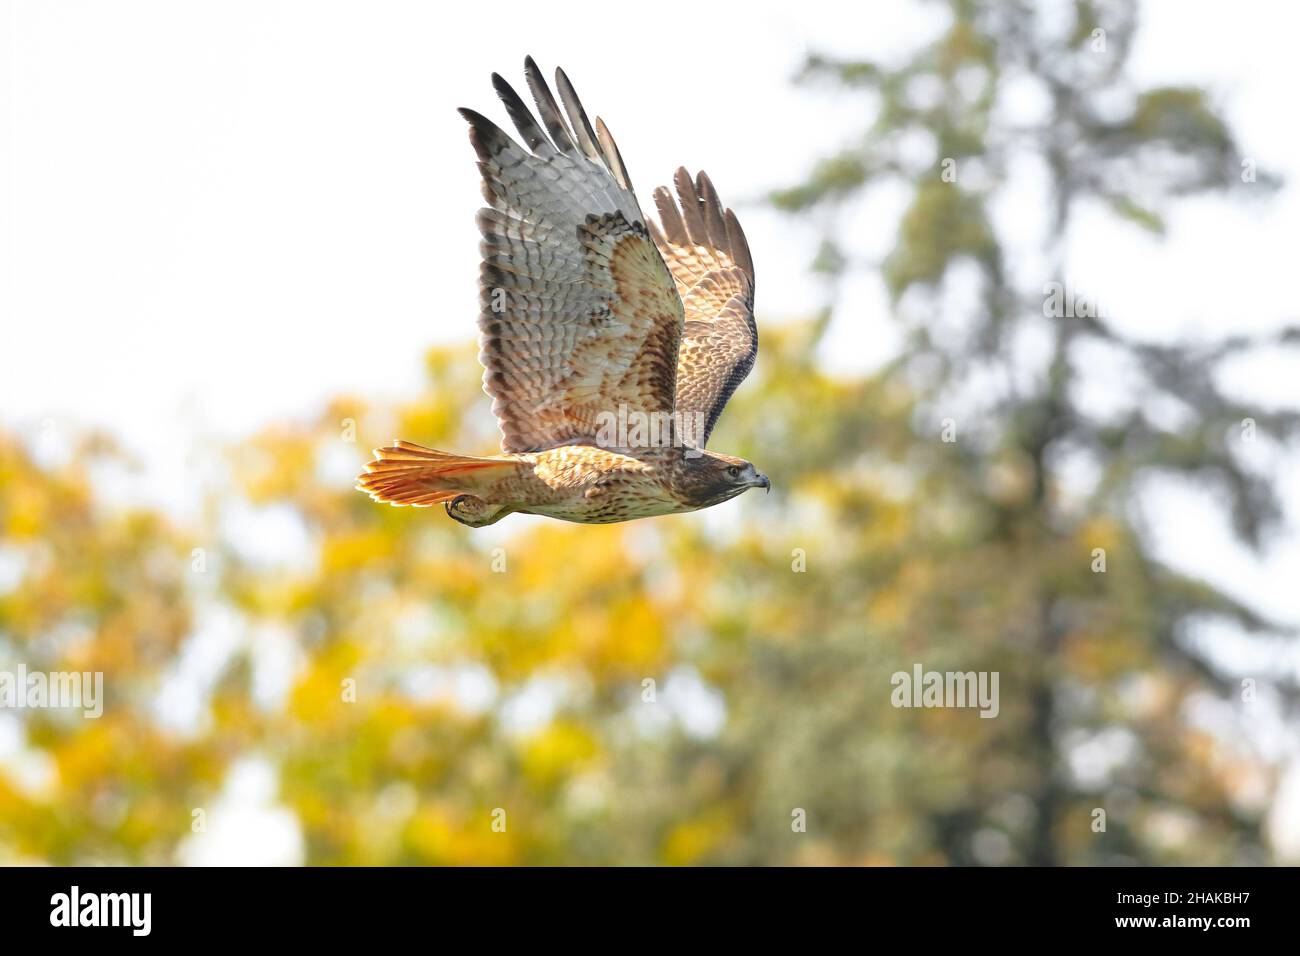 Close up of a beautiful Red-tailed Hawk flying through a mixed forest setting in the Fall Season. Stock Photo